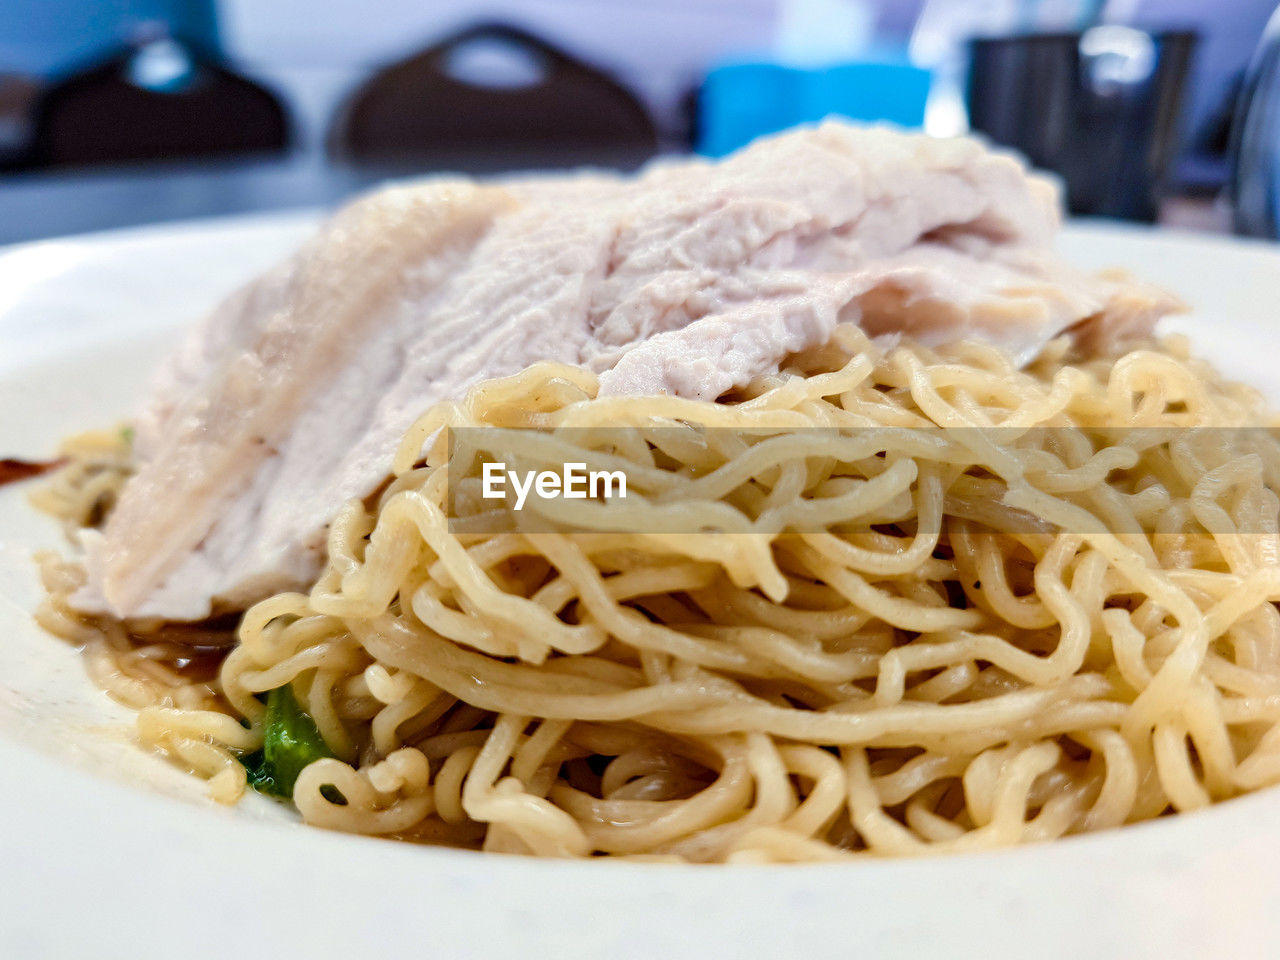 food, food and drink, italian food, pasta, cuisine, dish, freshness, spaghetti, plate, indoors, close-up, no people, wellbeing, healthy eating, noodle, carbonara, focus on foreground, selective focus, meal, pici, table, still life